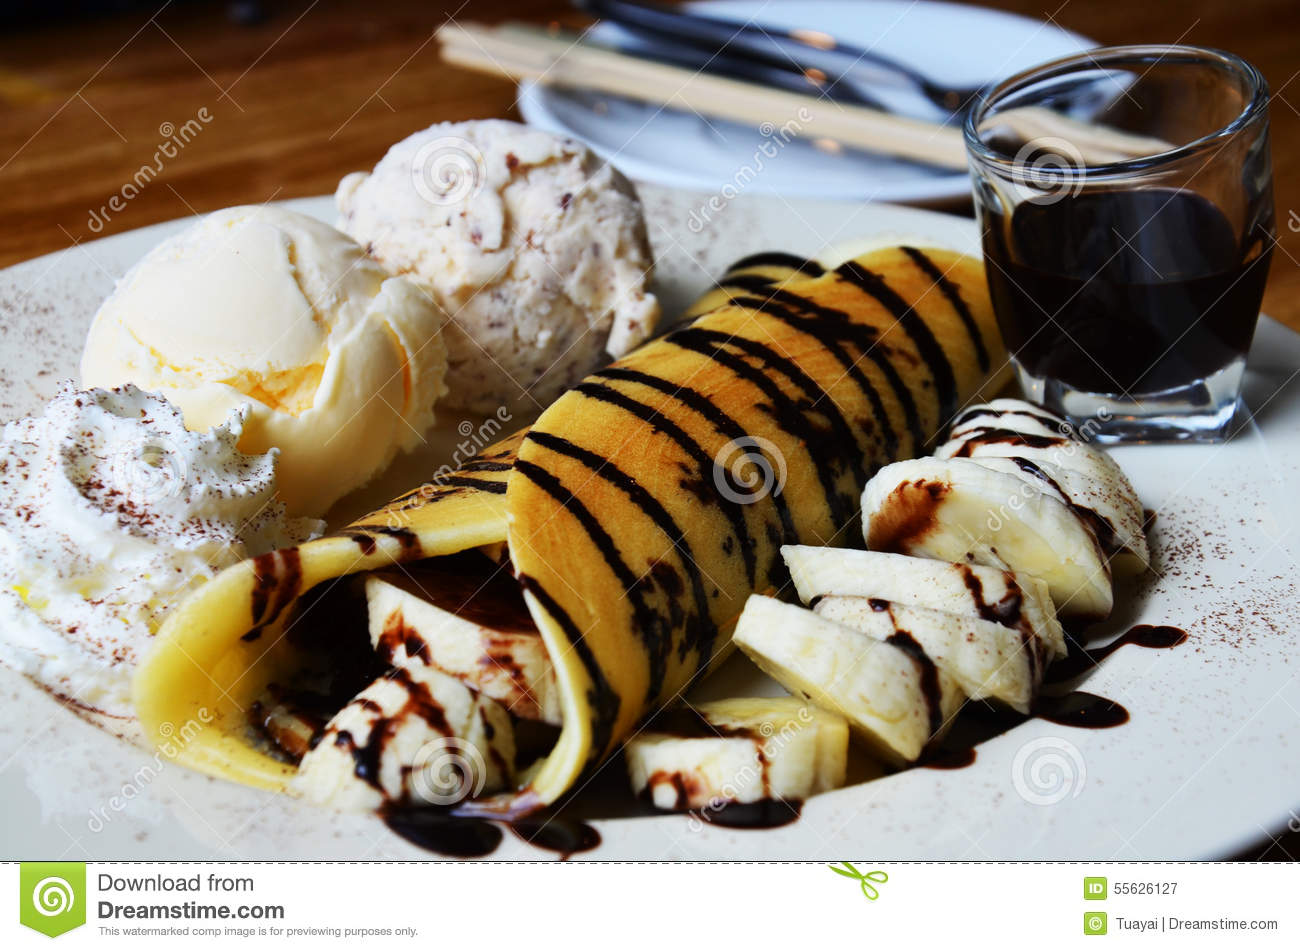 Ice Cream and Banana Pancakes with Chocolate Chips